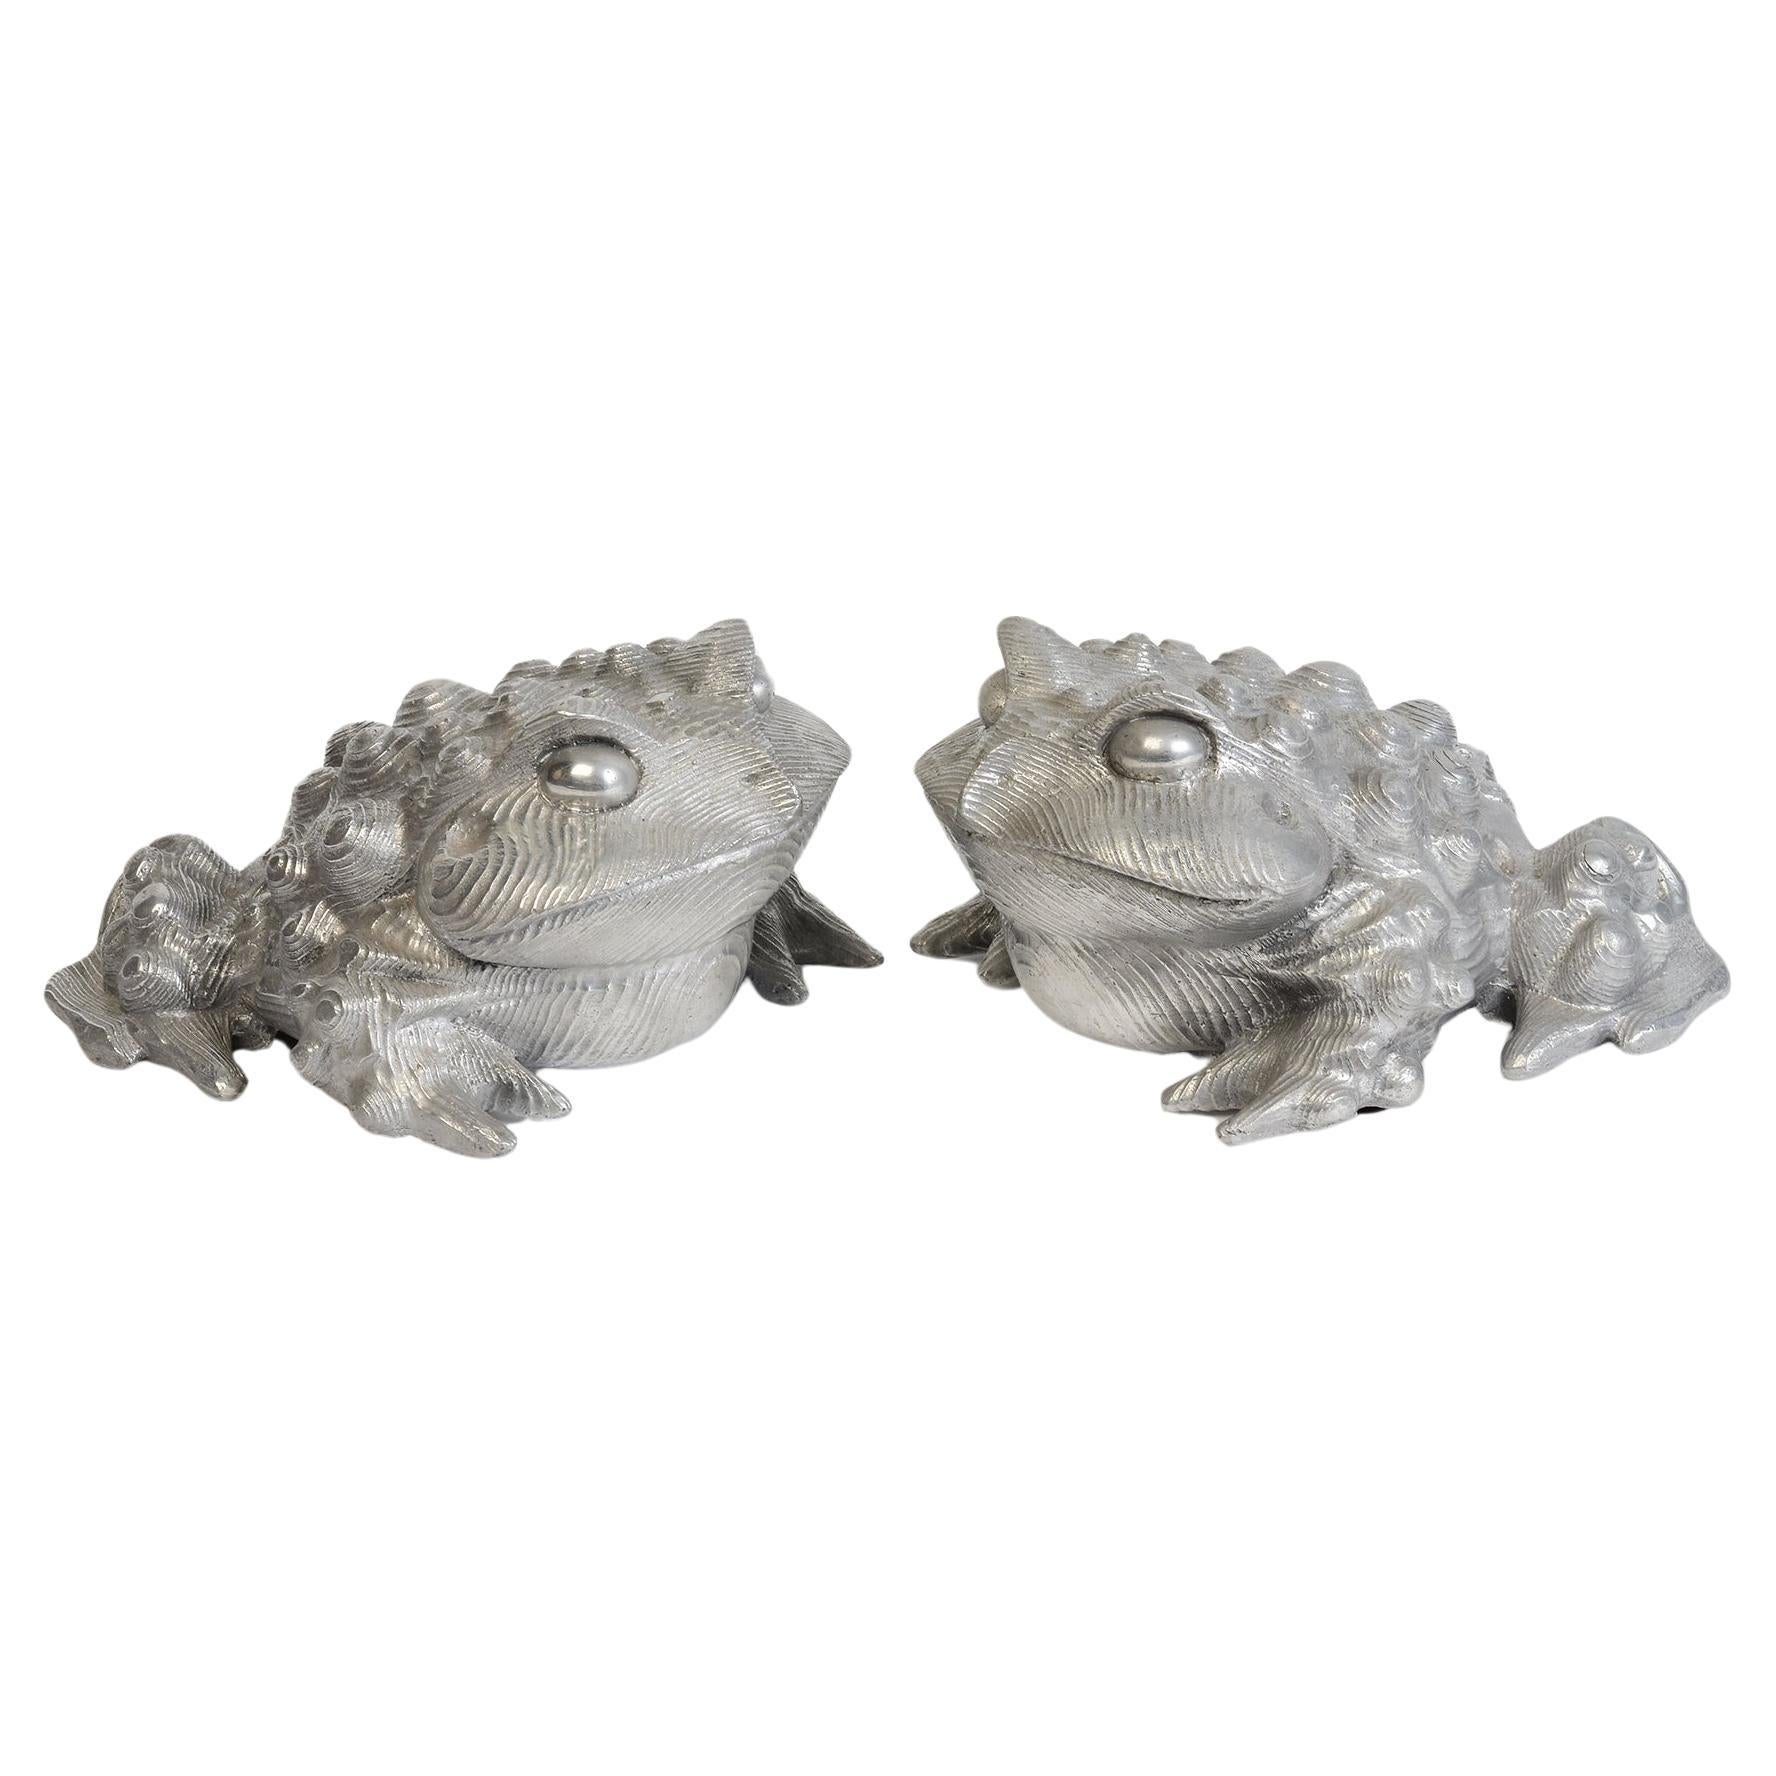 A Pair of Japanese Bronze Toads For Sale